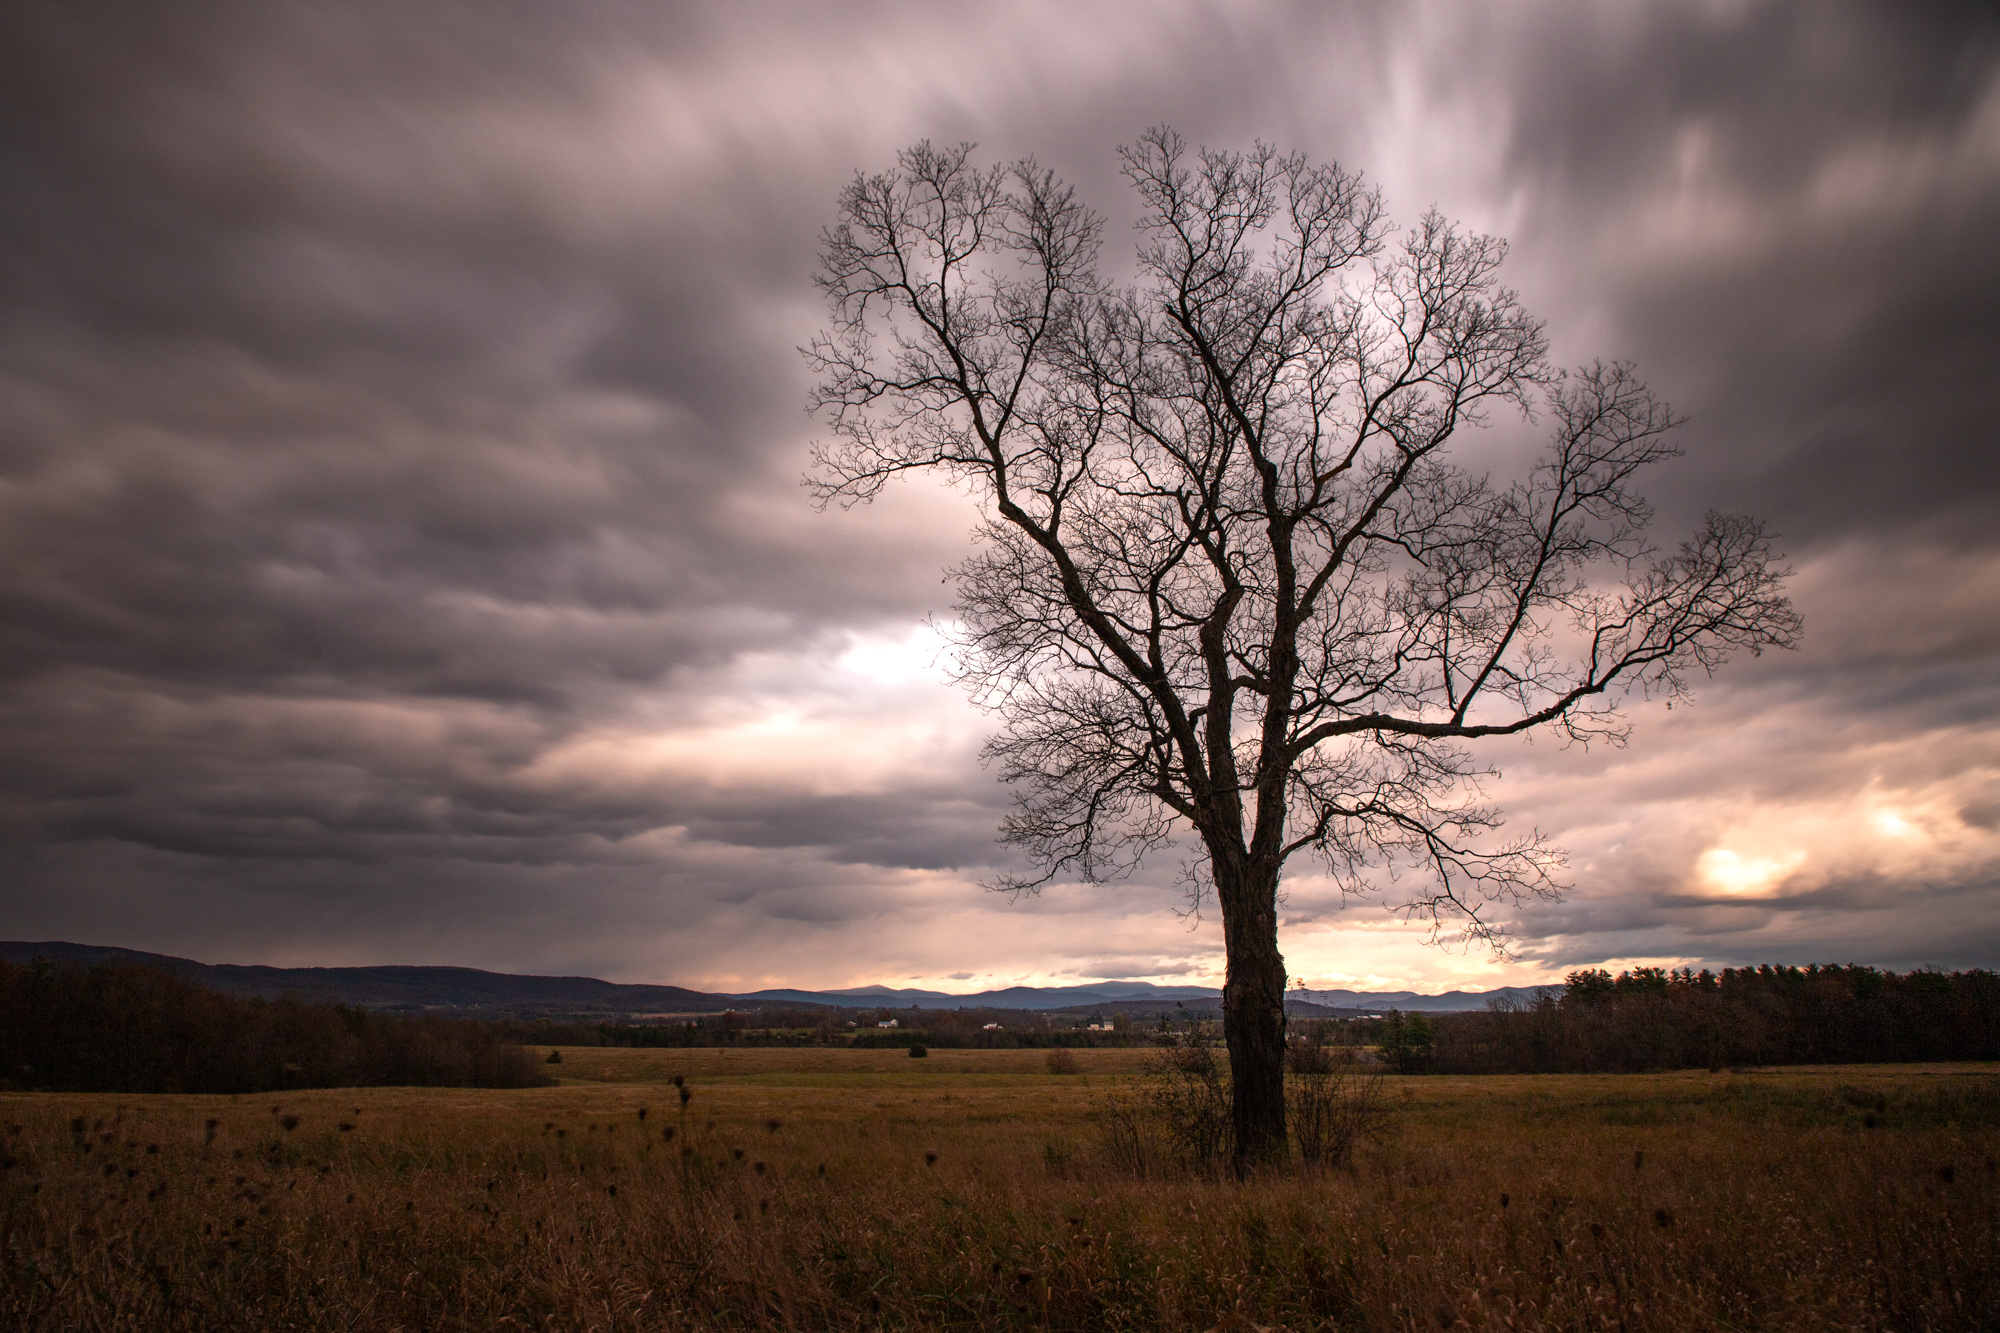 Tree Silhouetted against Dramatic Sky - Long Exposure